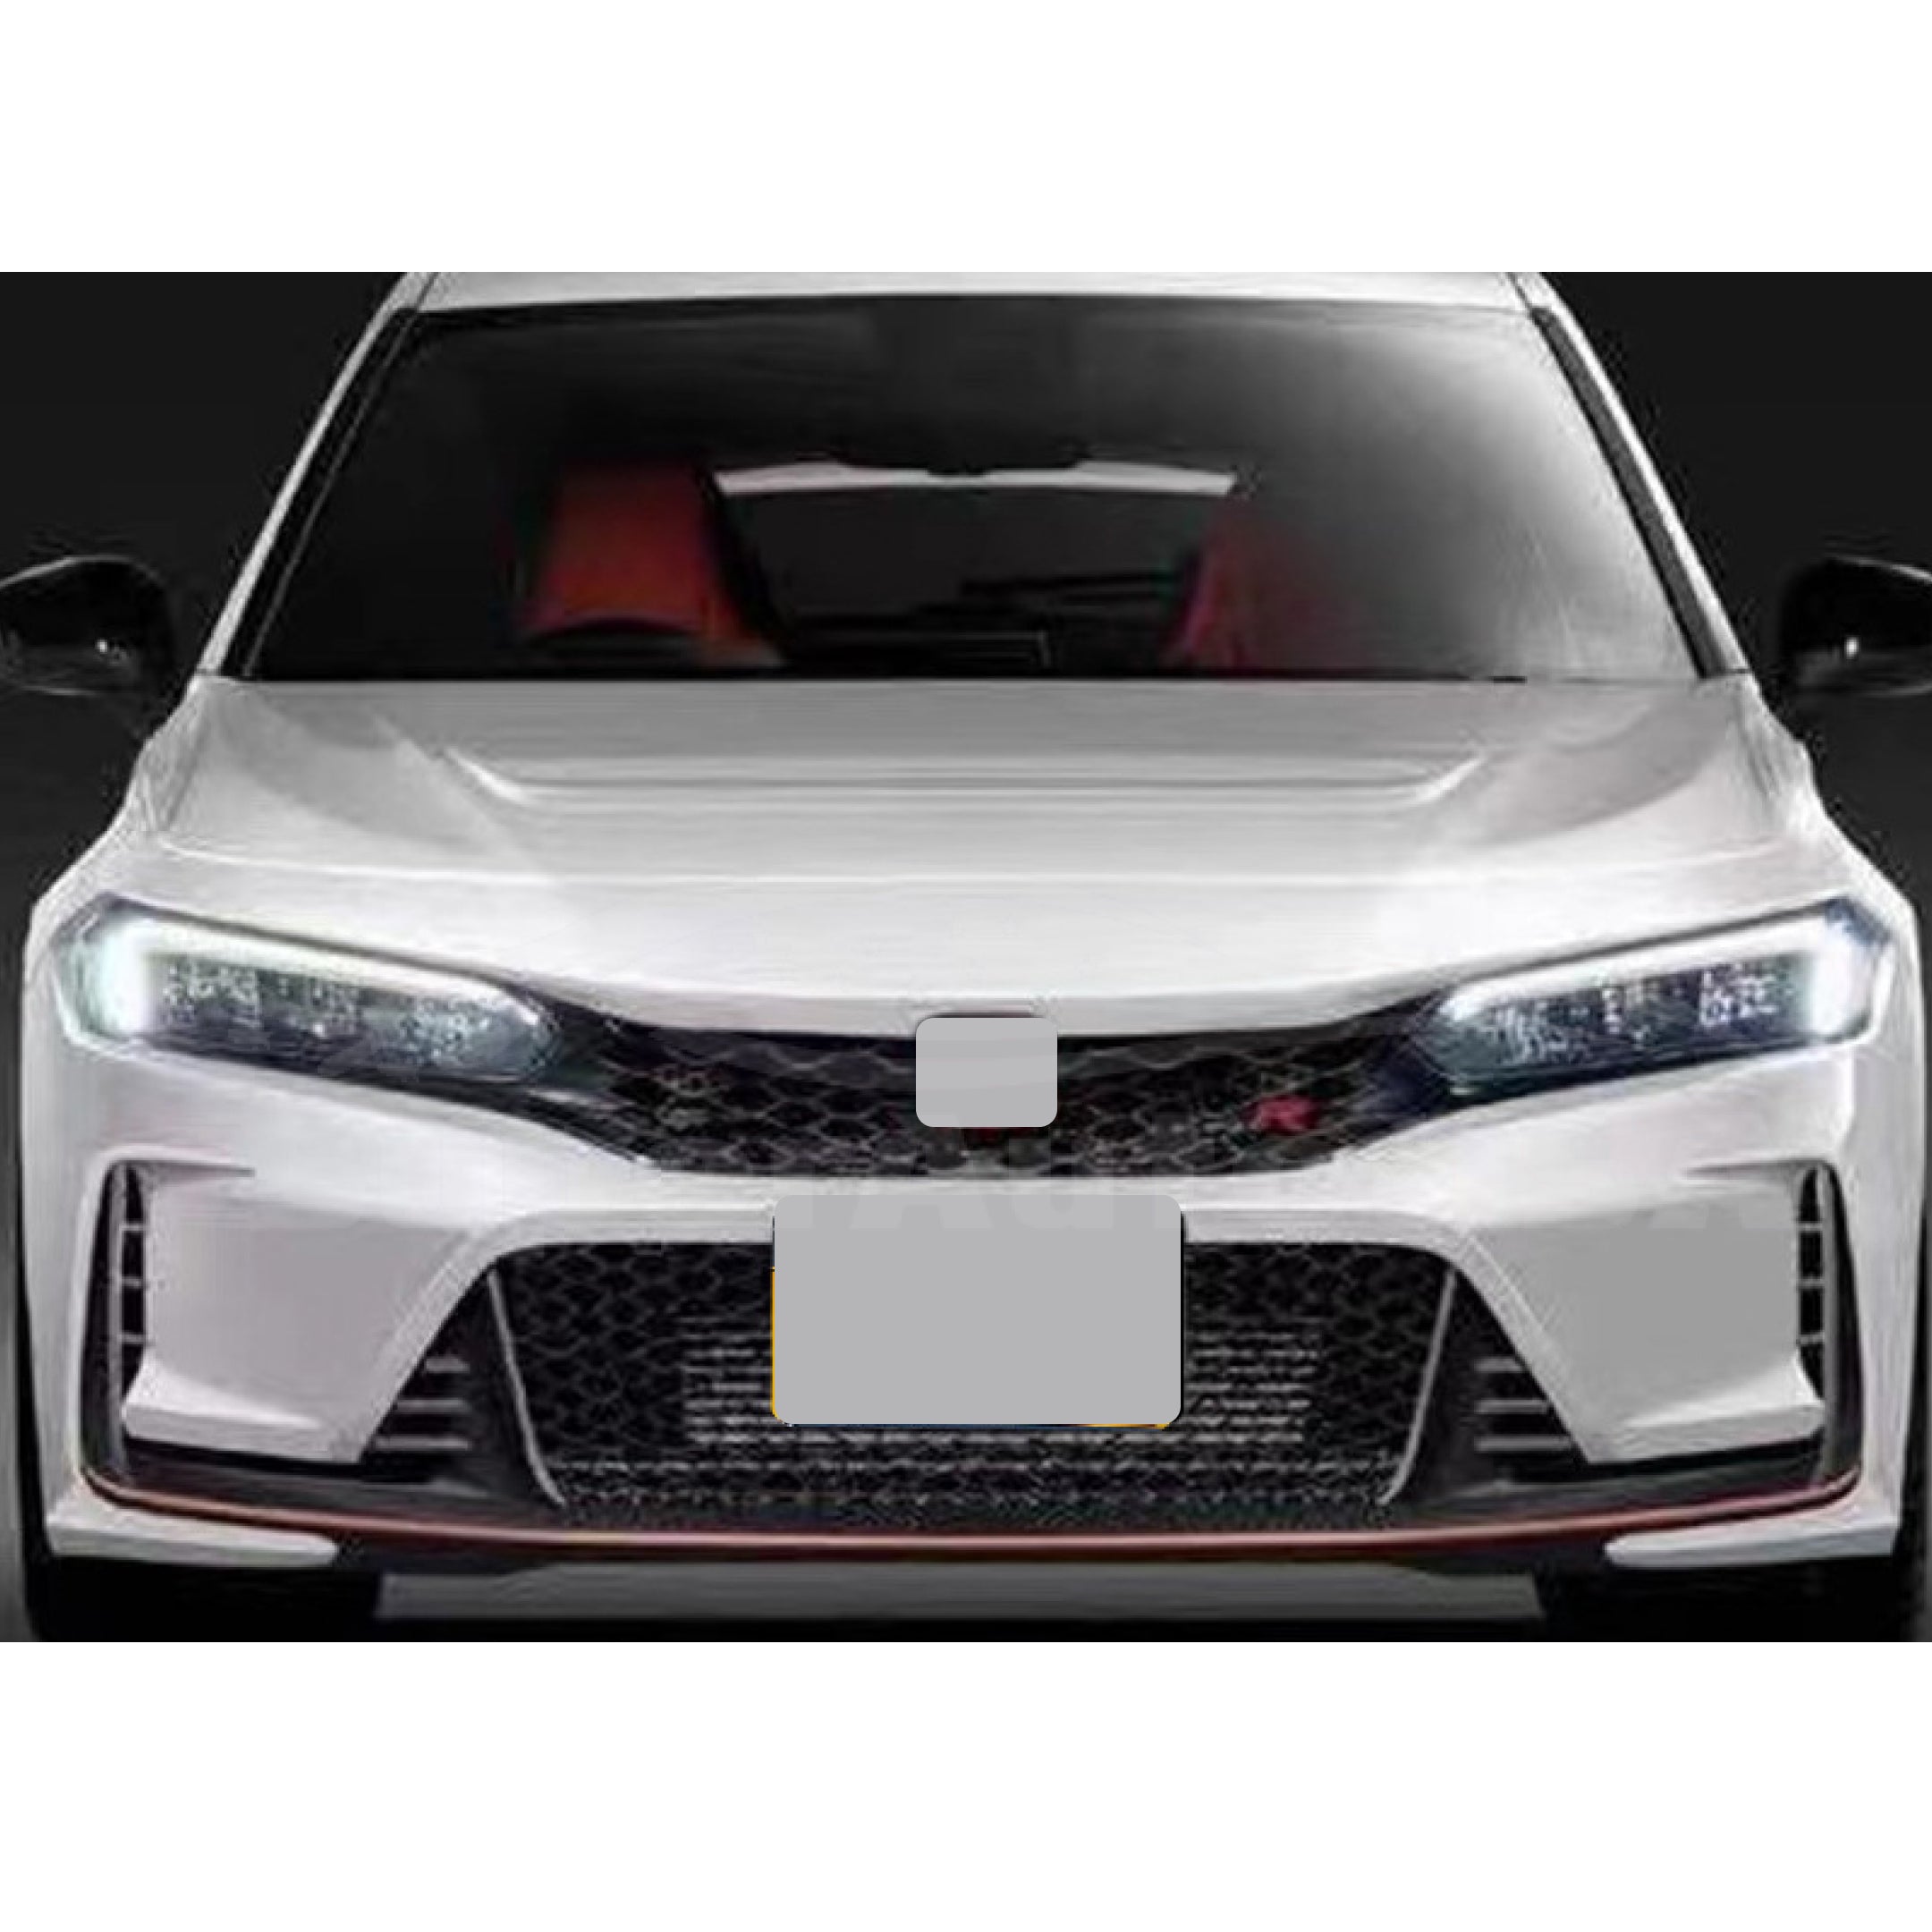 Fit 22-23 Honda Civic Type R Gloss Black Si Style Front Bumper Honeycomb Grille